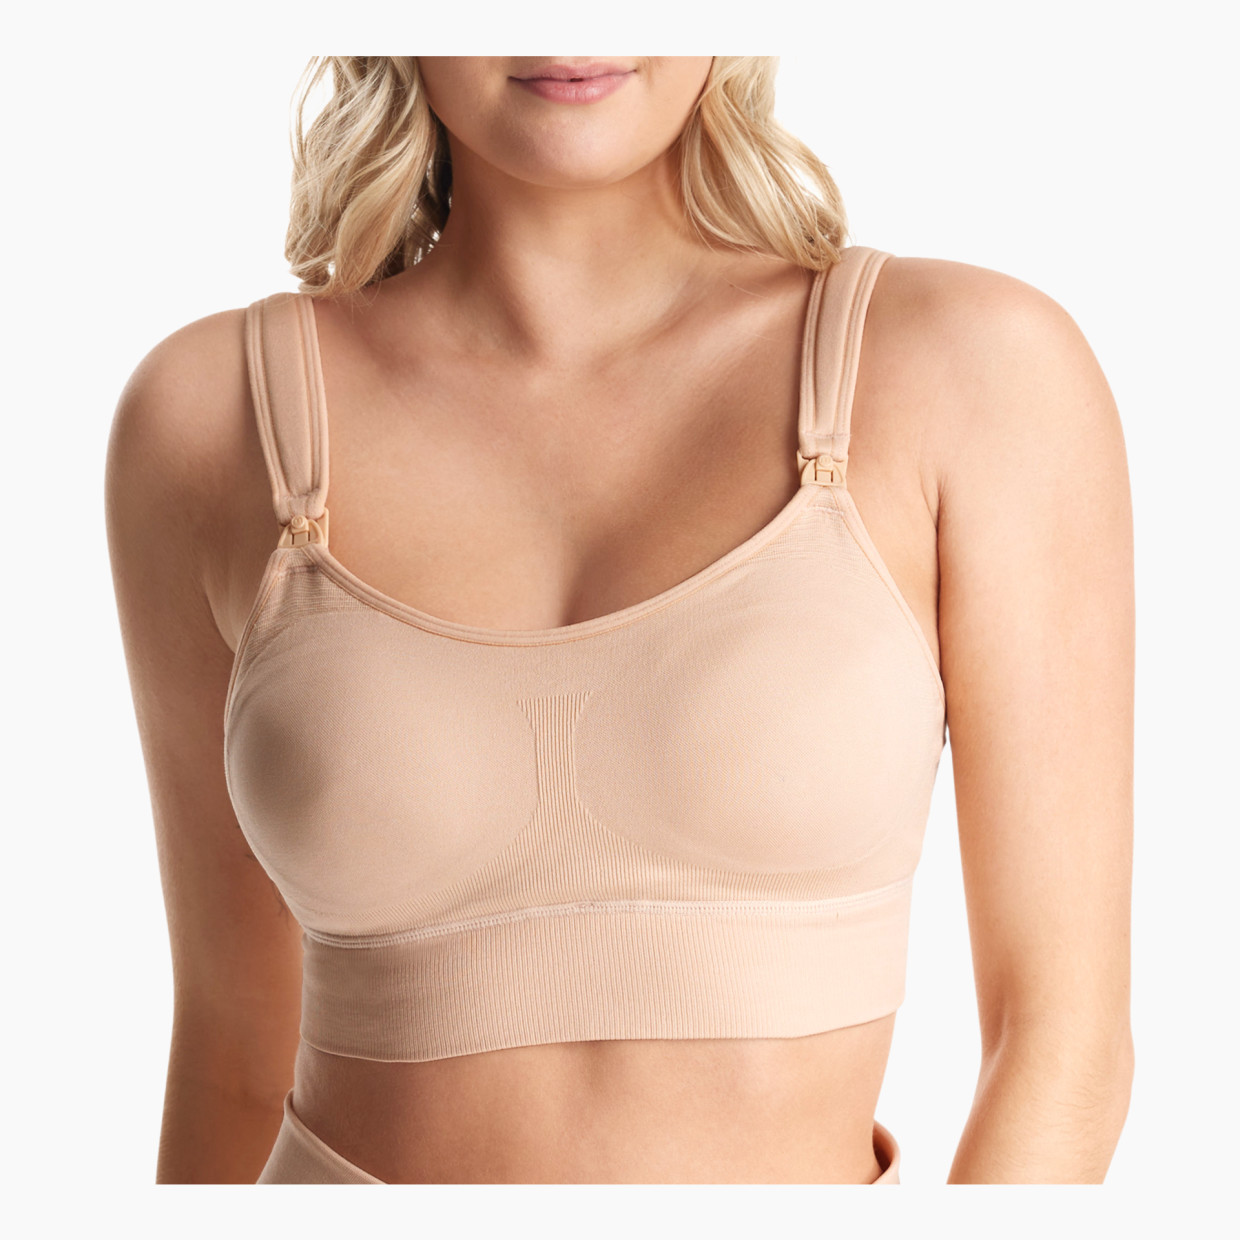  Pumping And Nursing Bra In One